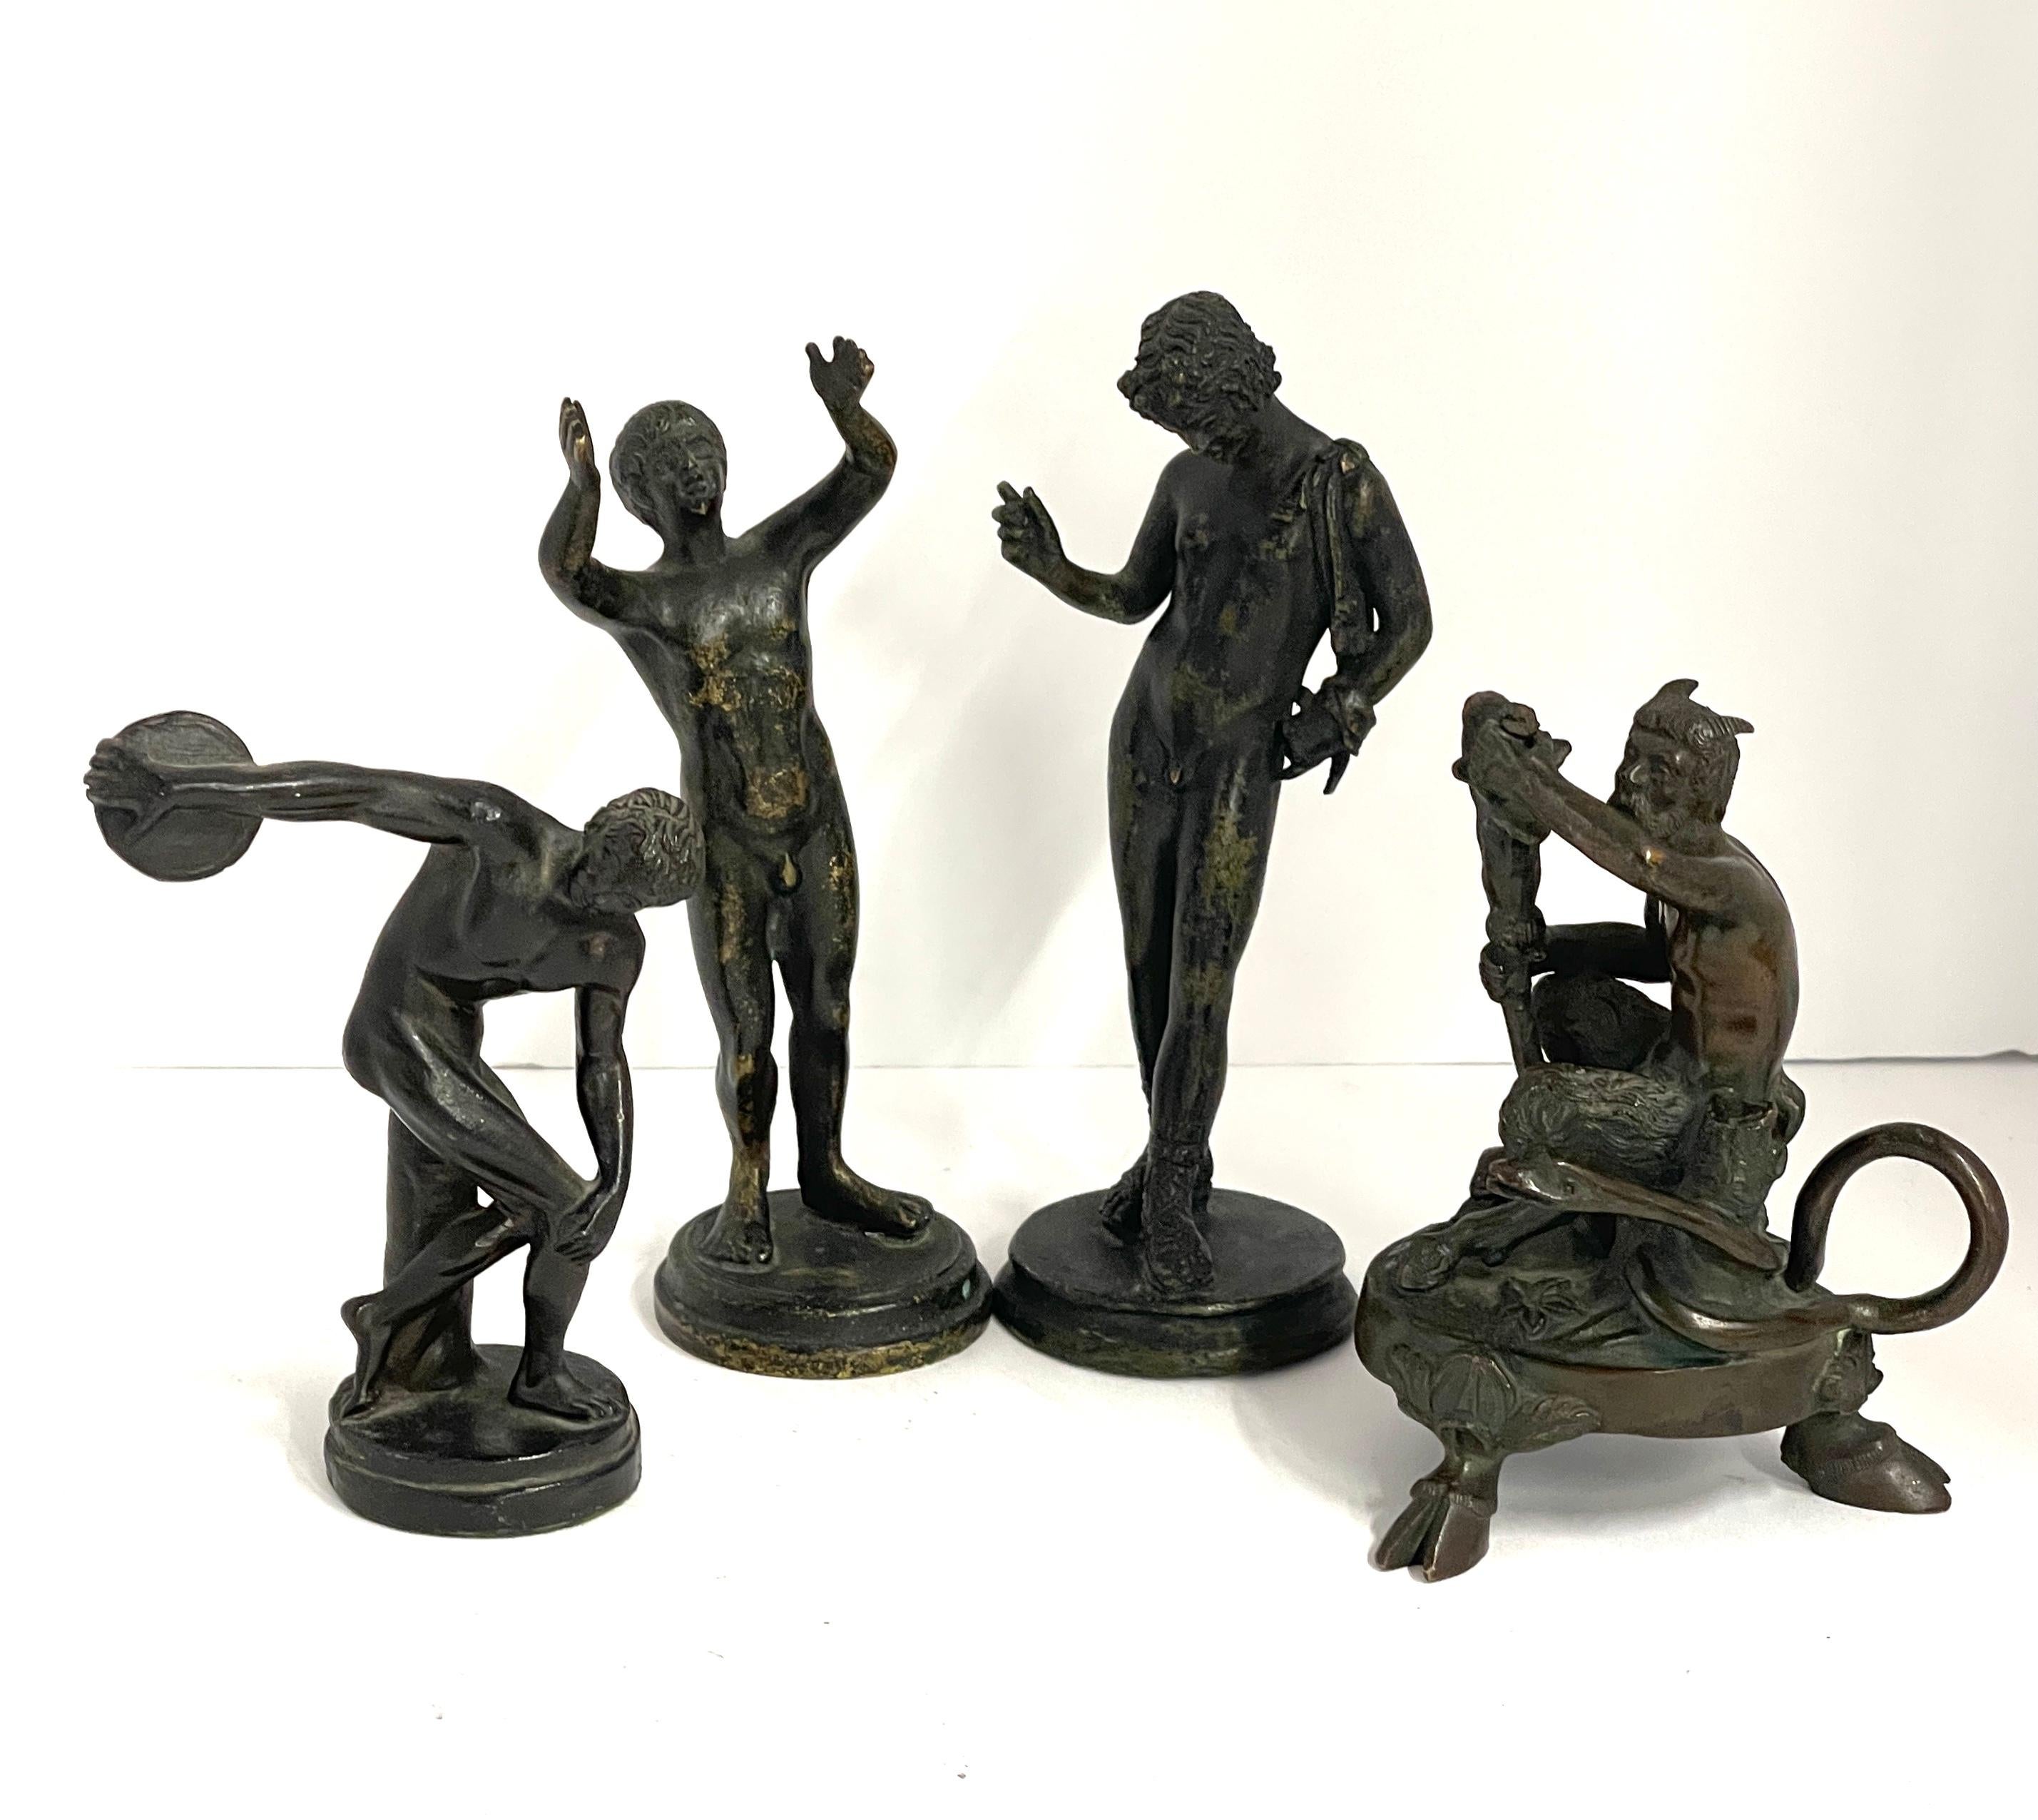 A nice collection of 4 grand tour neoclassical sculptures. There is a bronze Narcissus. A bronze satyr that was once a candlestick, missing its candle holder cup. A discus thrower, that has a weighted bottom and I'm not sure is bronze. A magnet does